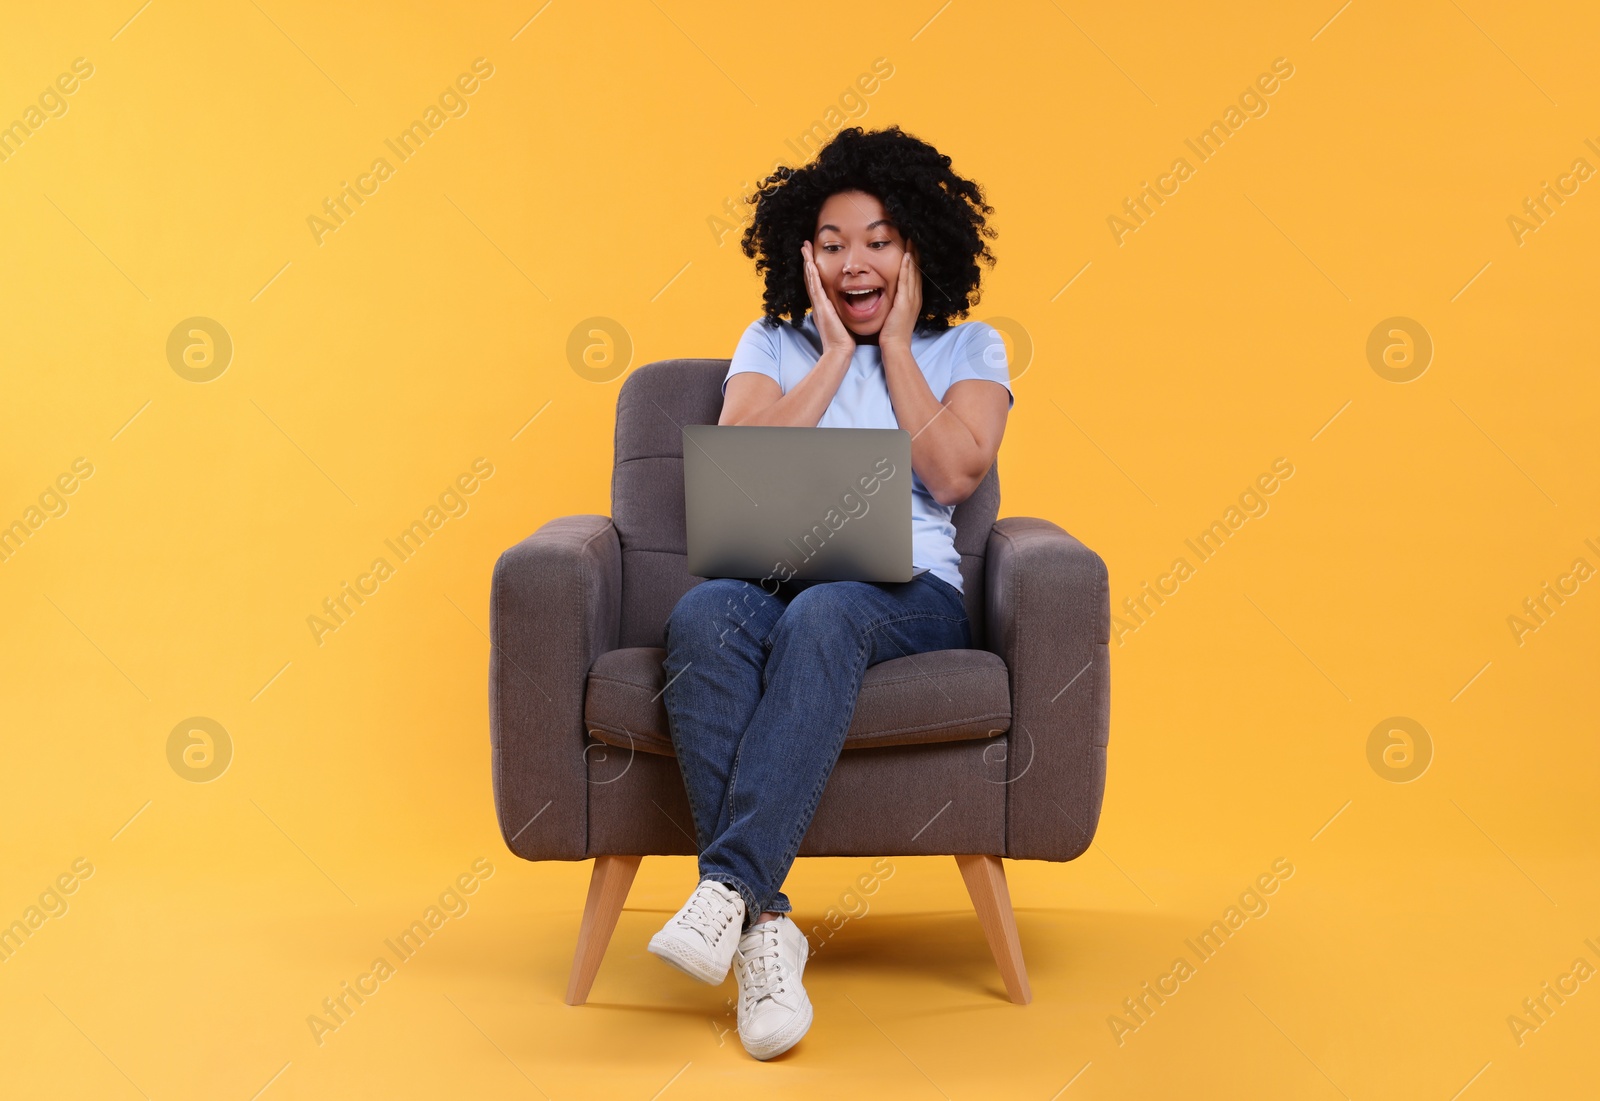 Photo of Emotional young woman with laptop sitting in armchair against yellow background